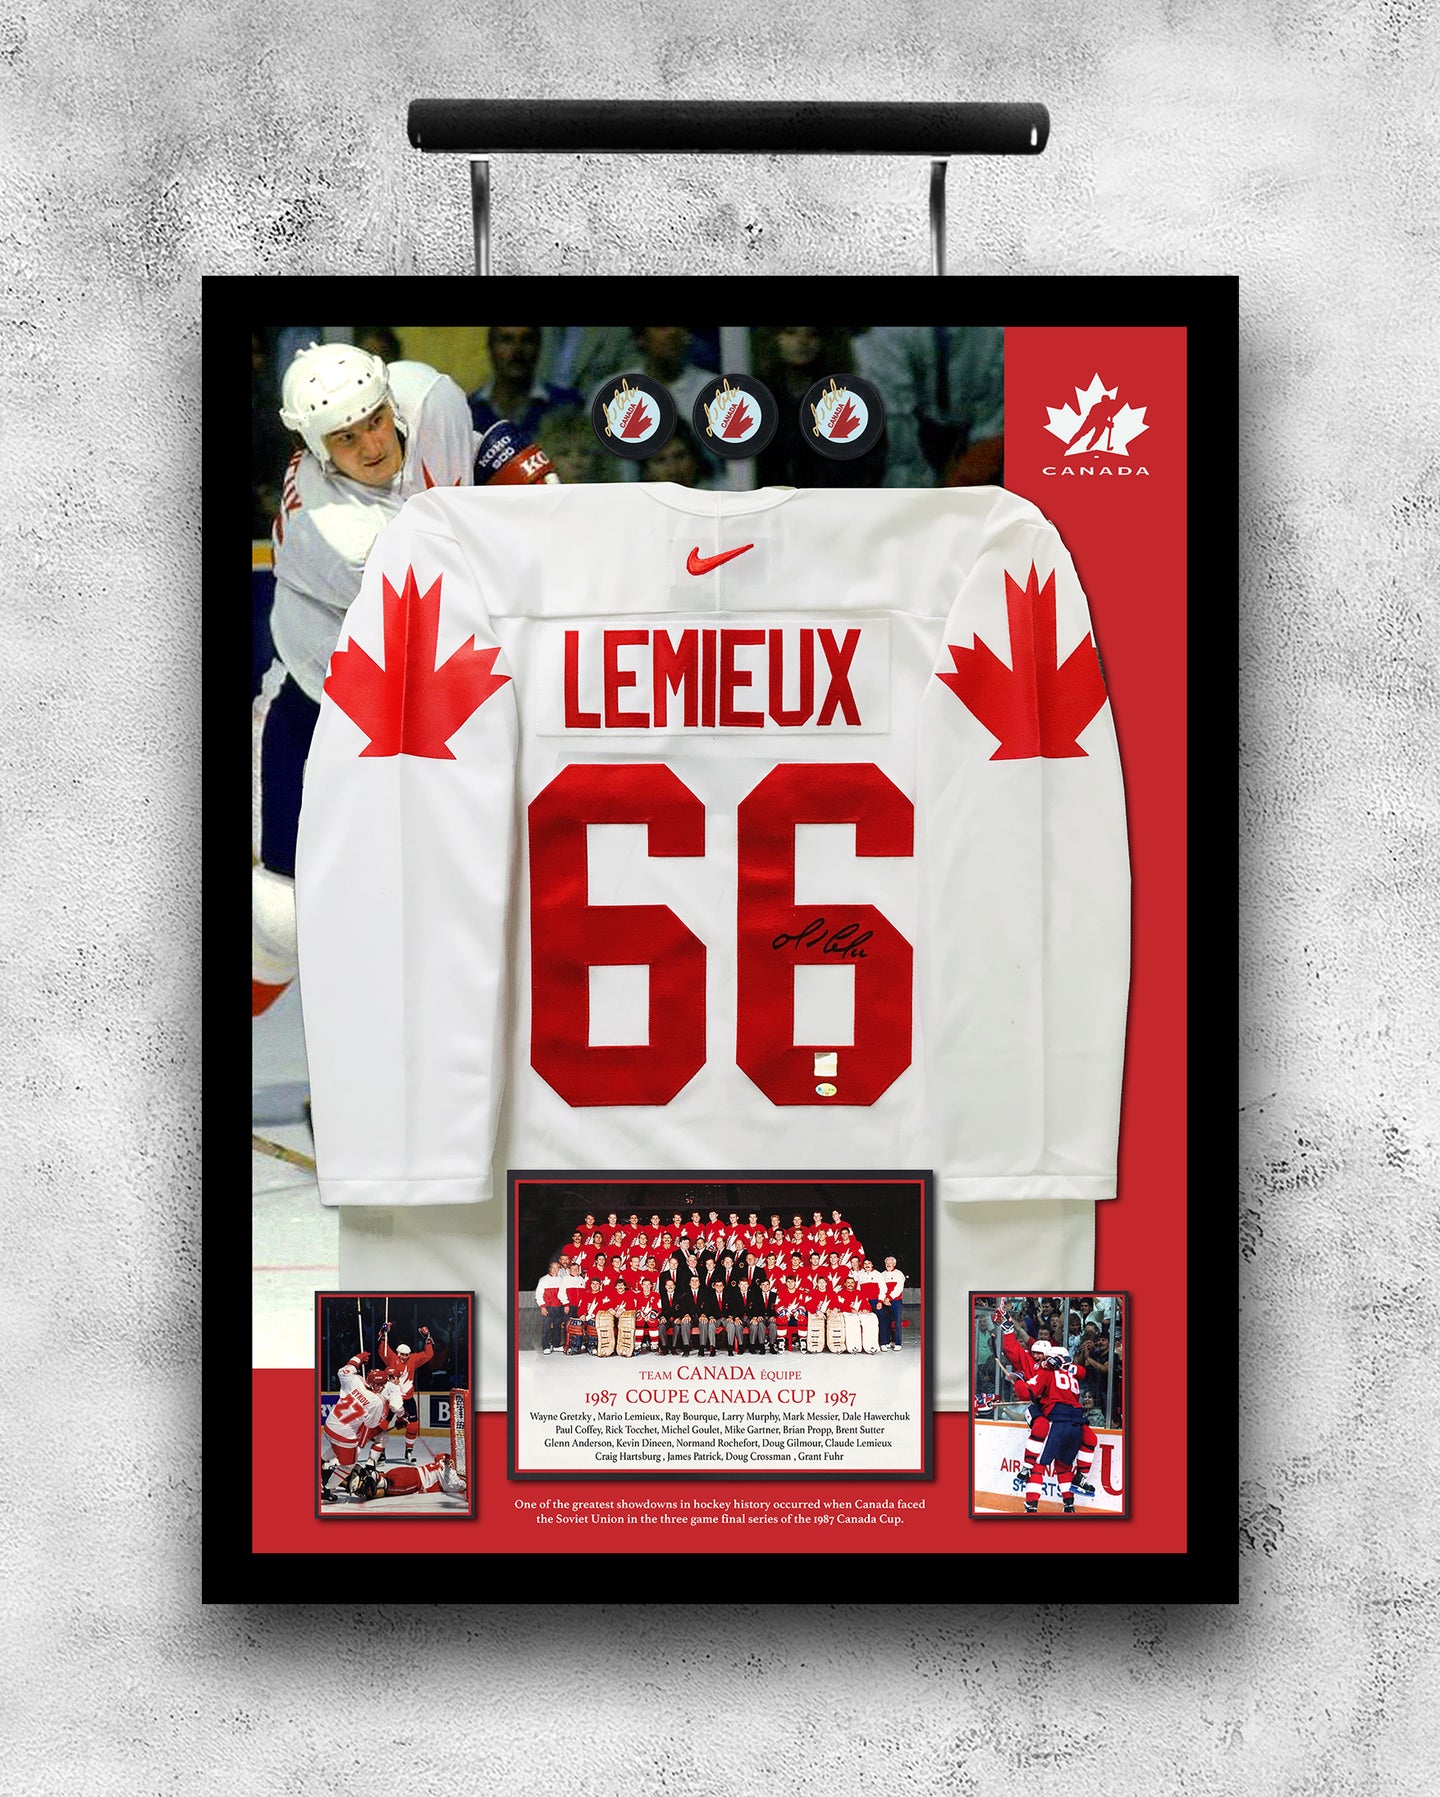 Lemieux Mario CAN | Jersey Frame